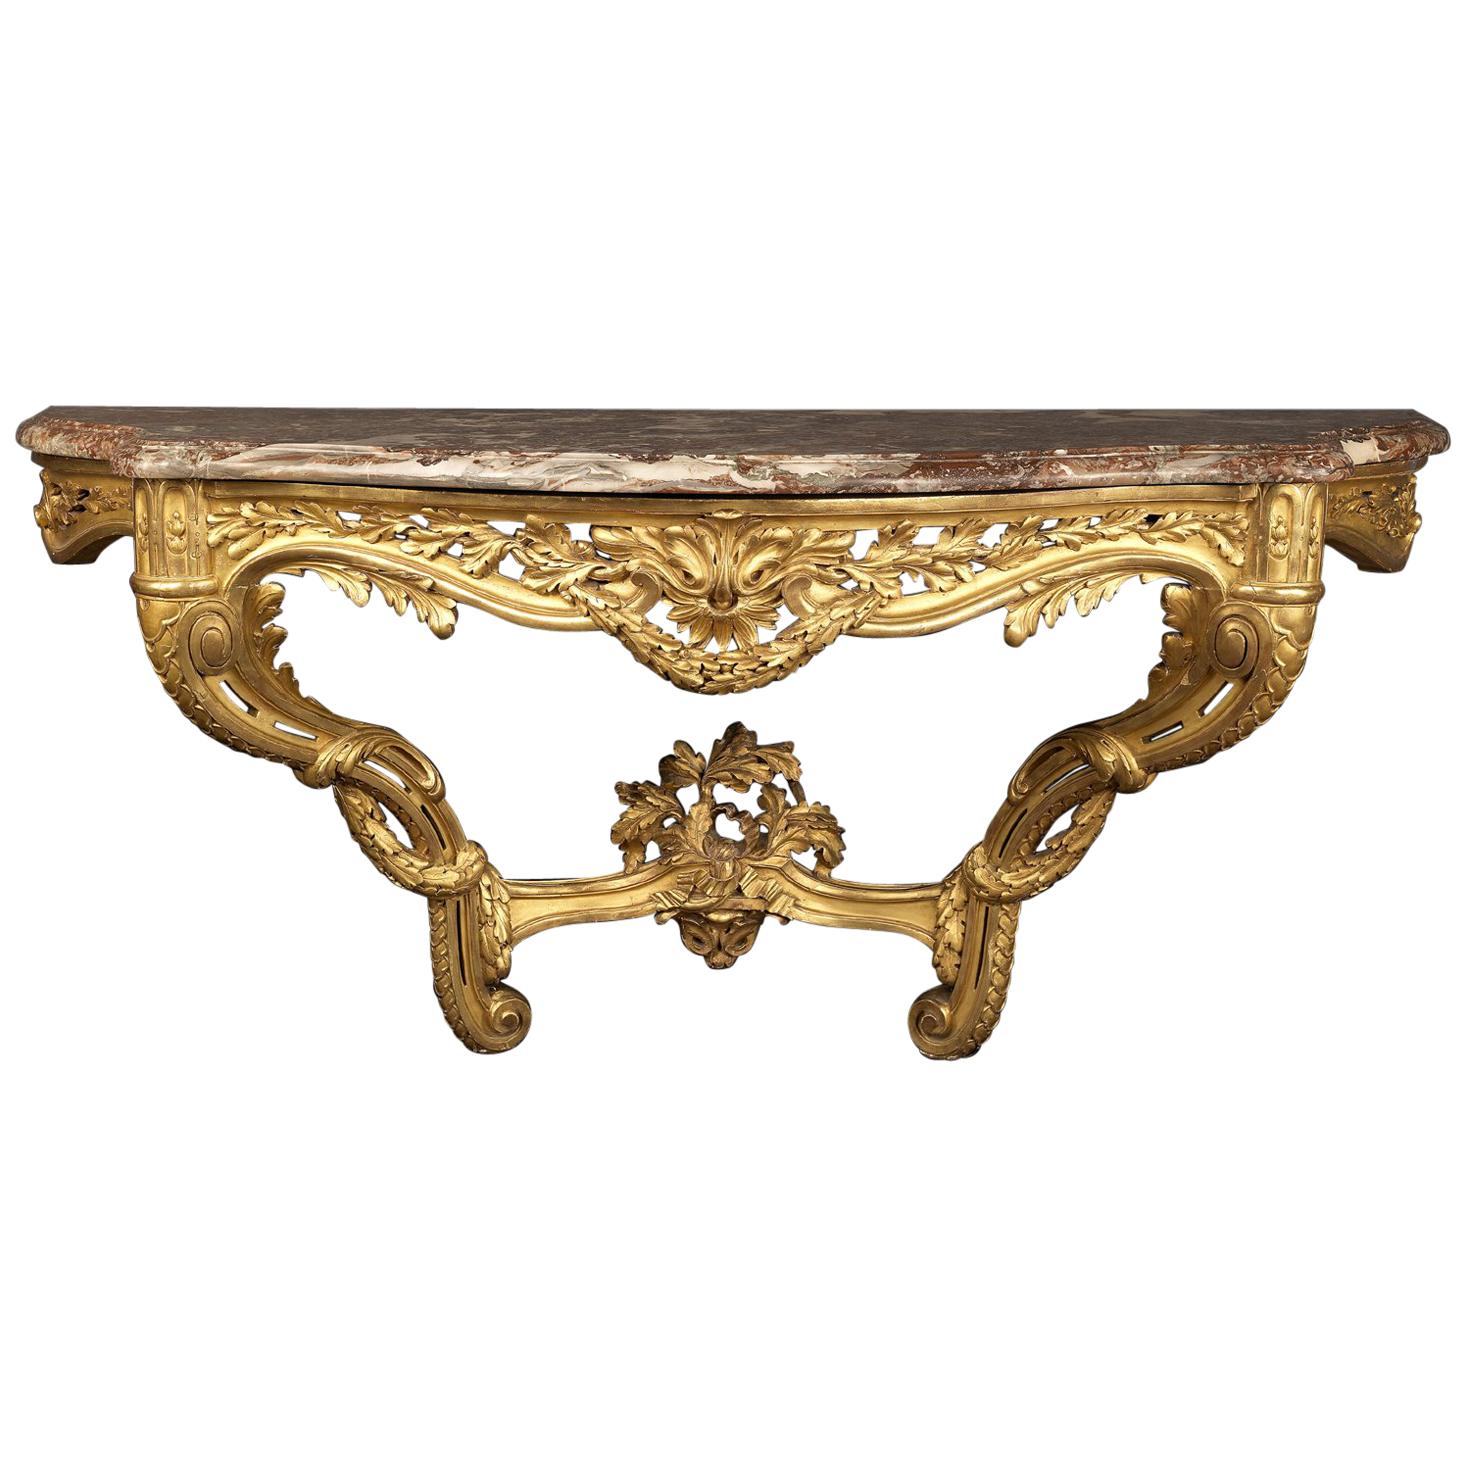 Transitional Style Carved Giltwood Console Table with a Marble Top, circa 1880